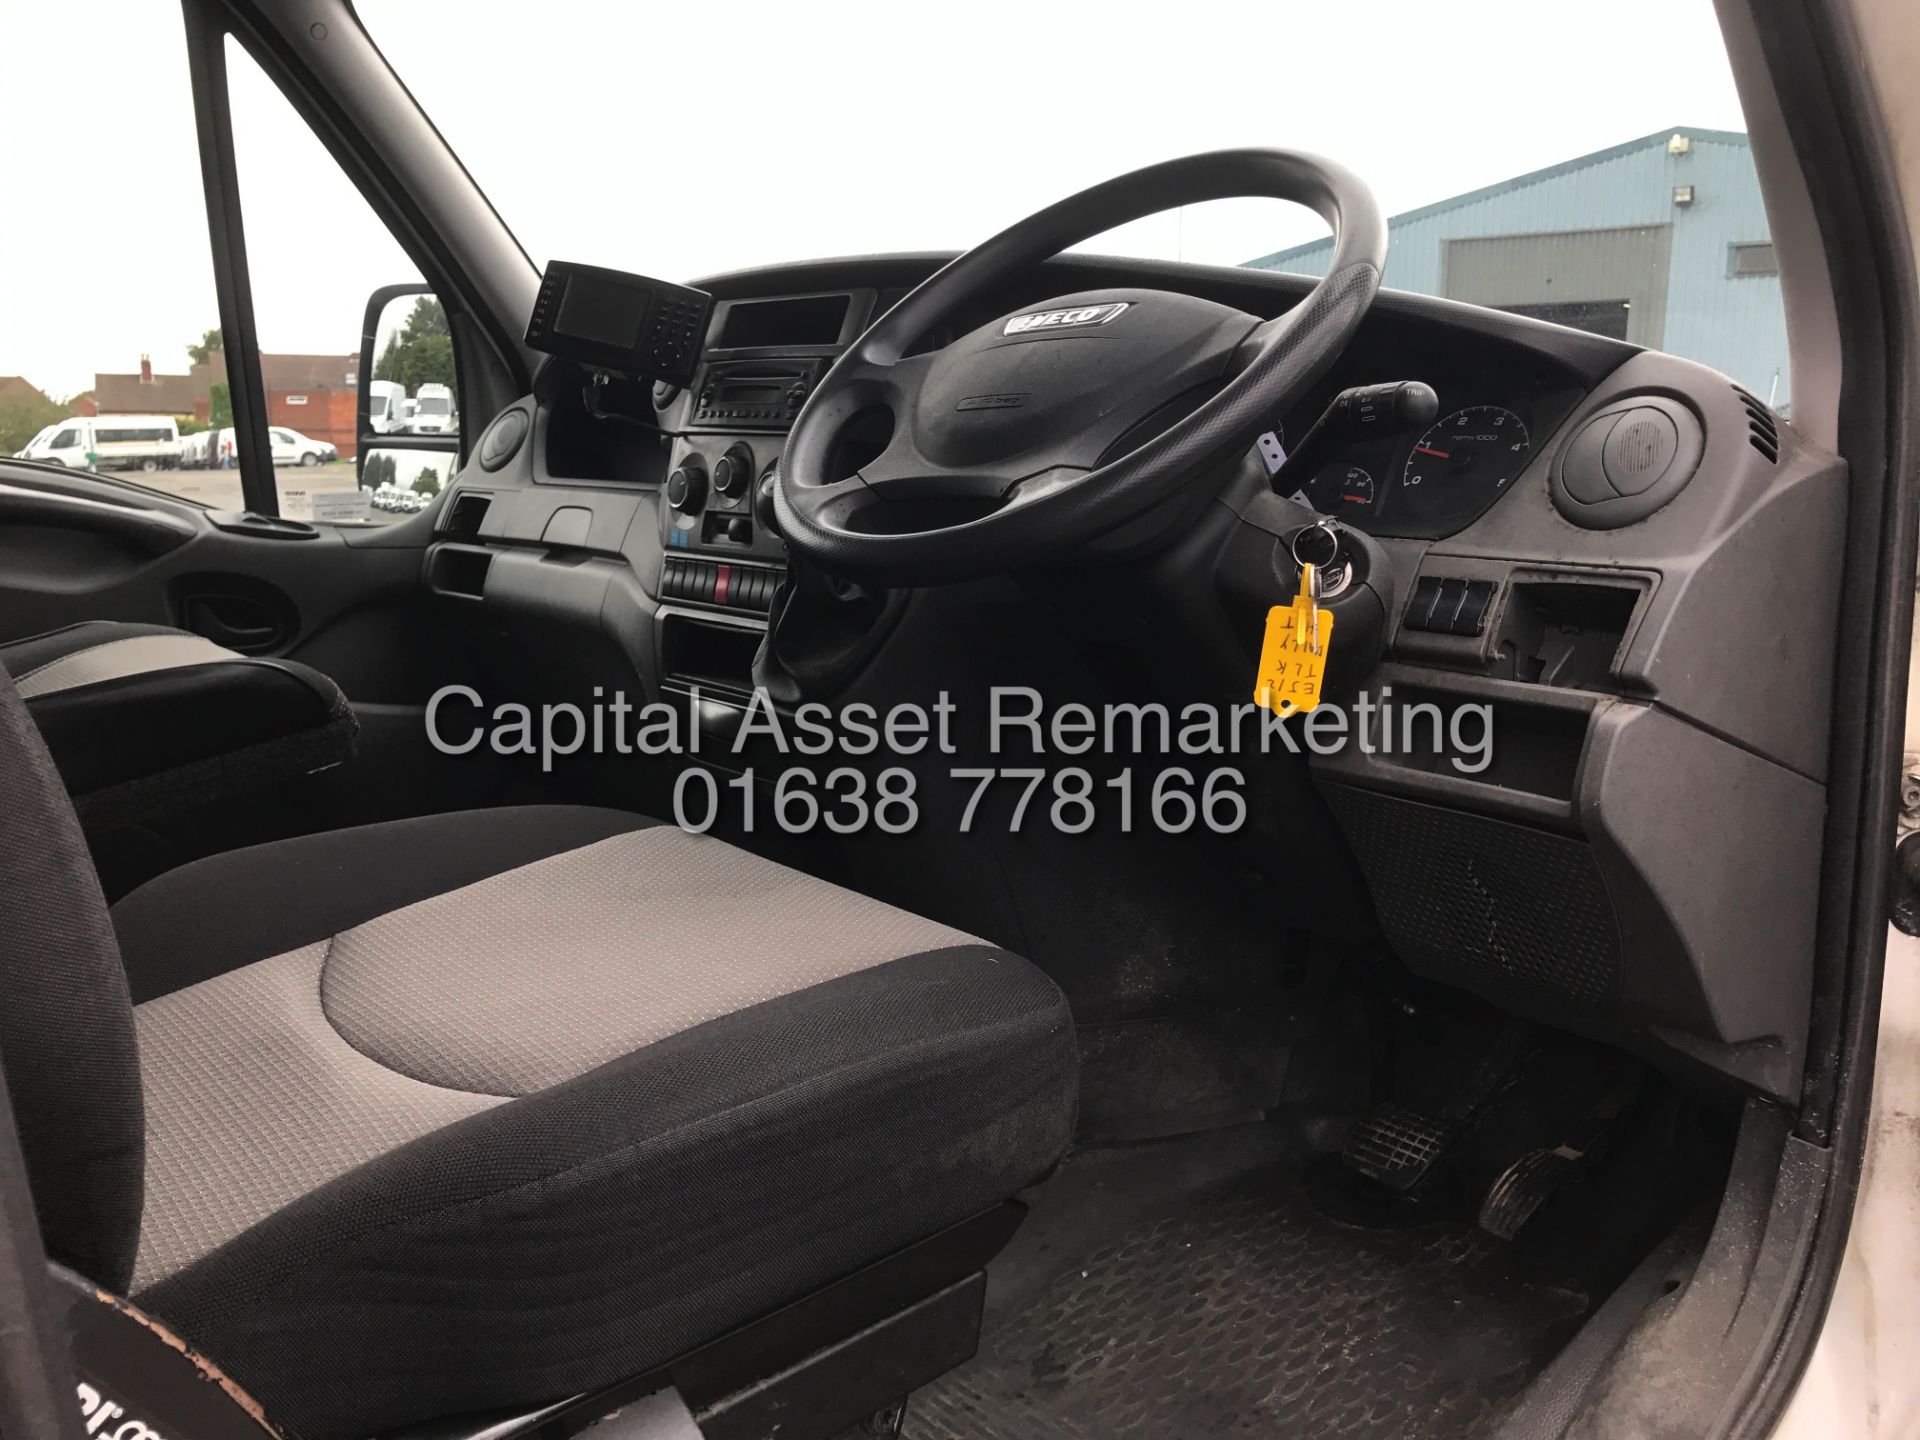 IVECO DAILY 35S11 LONG WHEEL BASE CHASSIS CAB - 12 REG - 1 OWNER FROM NEW - IDEAL RECOVERY TRUCK!!!! - Image 9 of 13